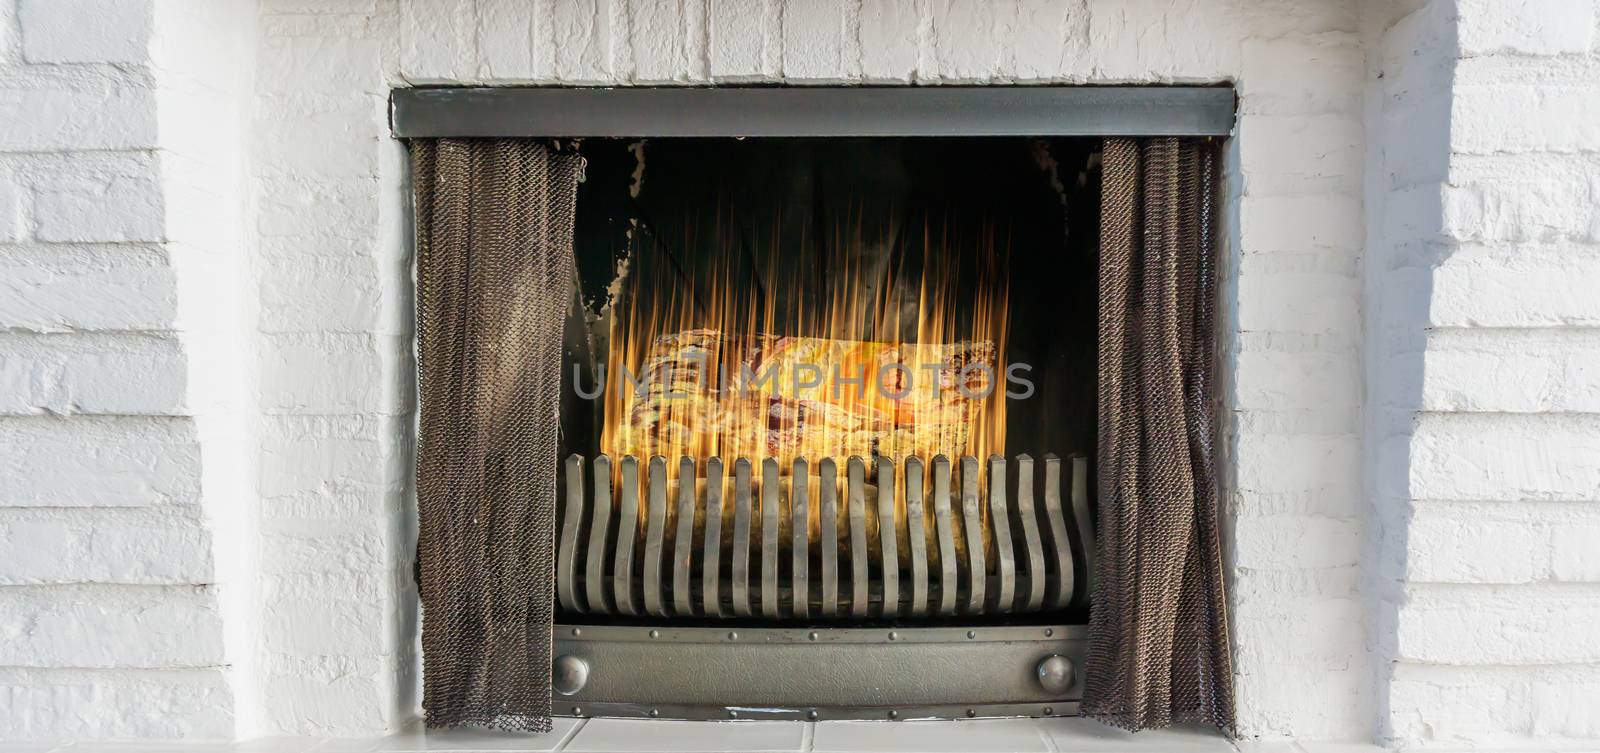 Burning fireplace with iron curtains in closeup winter background by charlottebleijenberg